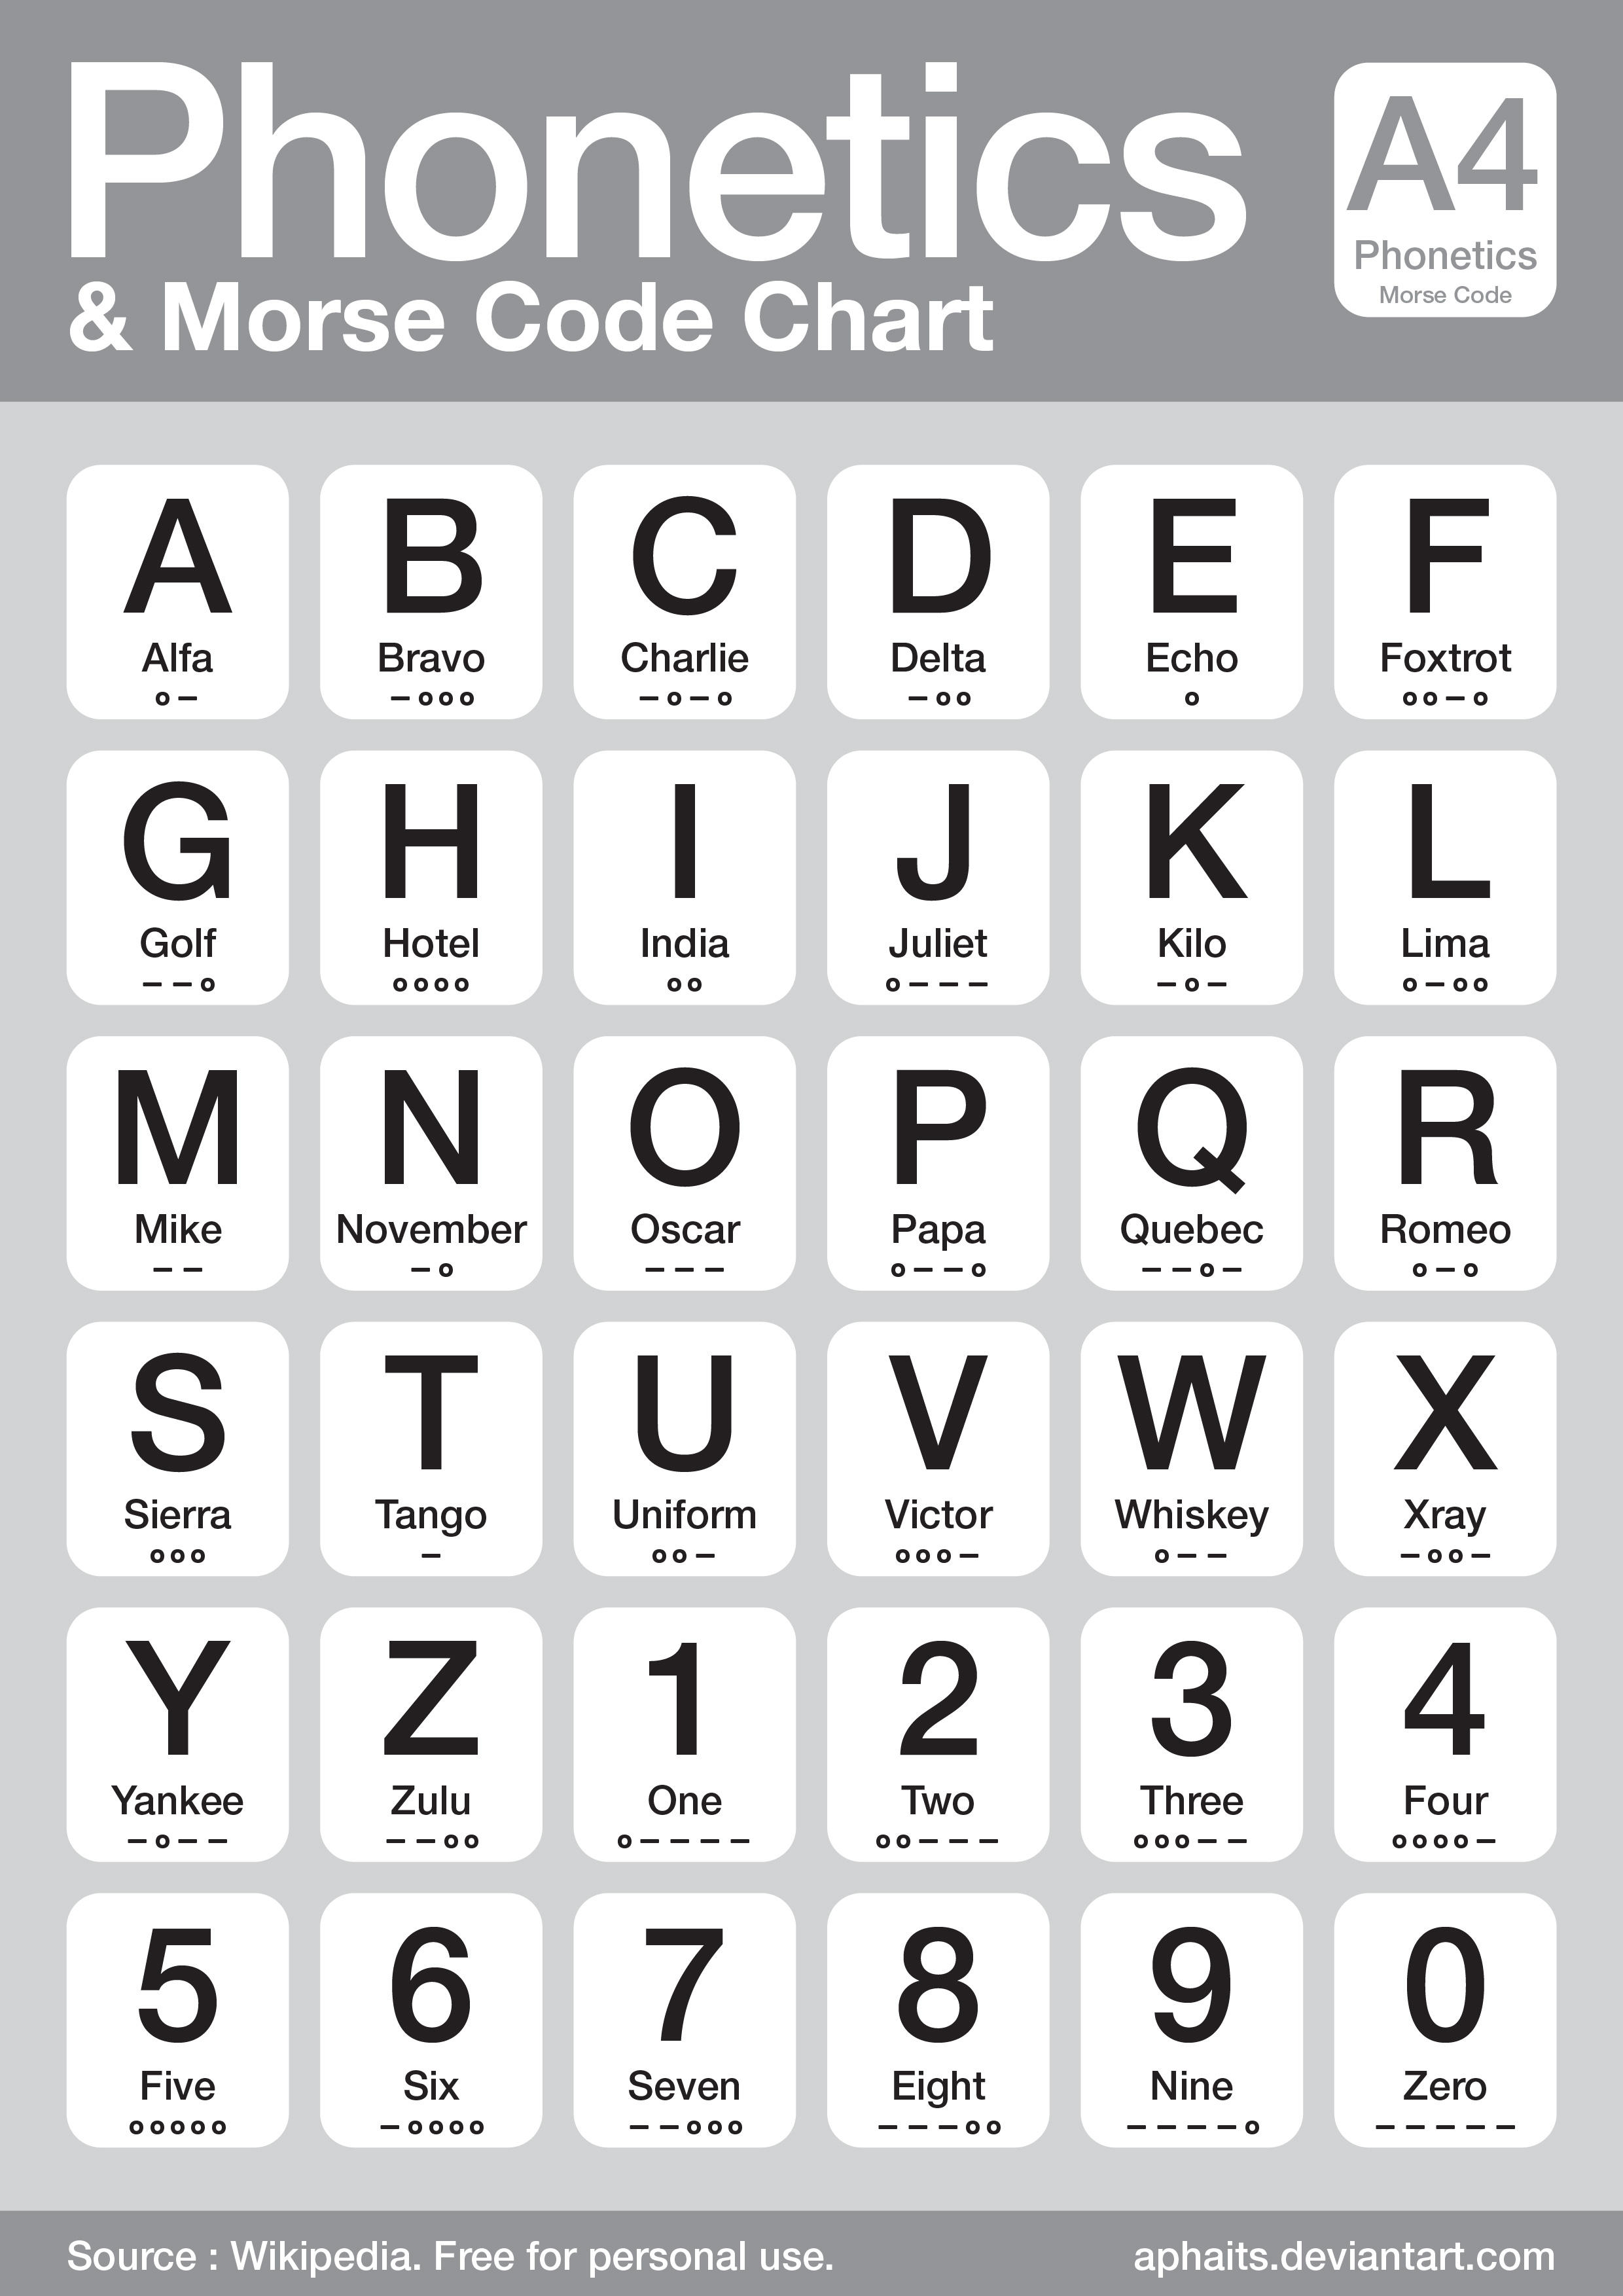 Phonetics and Morse Code Chart by aphaits on DeviantArt